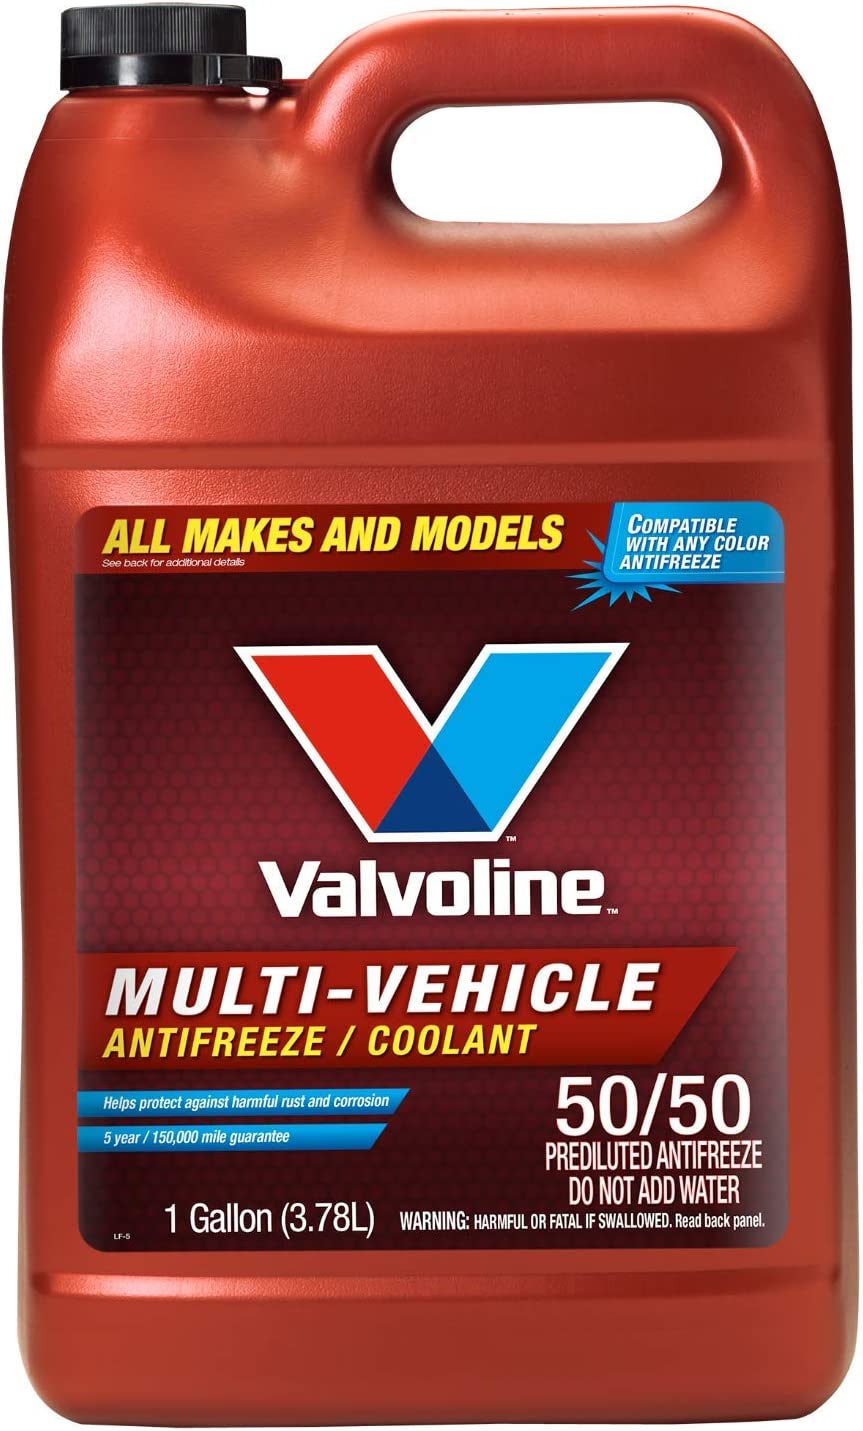 1-Gallon Valvoline Multi-Vehicle 50/50 Prediluted Ready-to-Use Antifreeze/Coolant $6.50 + Free Shipping w/ Prime or $25+